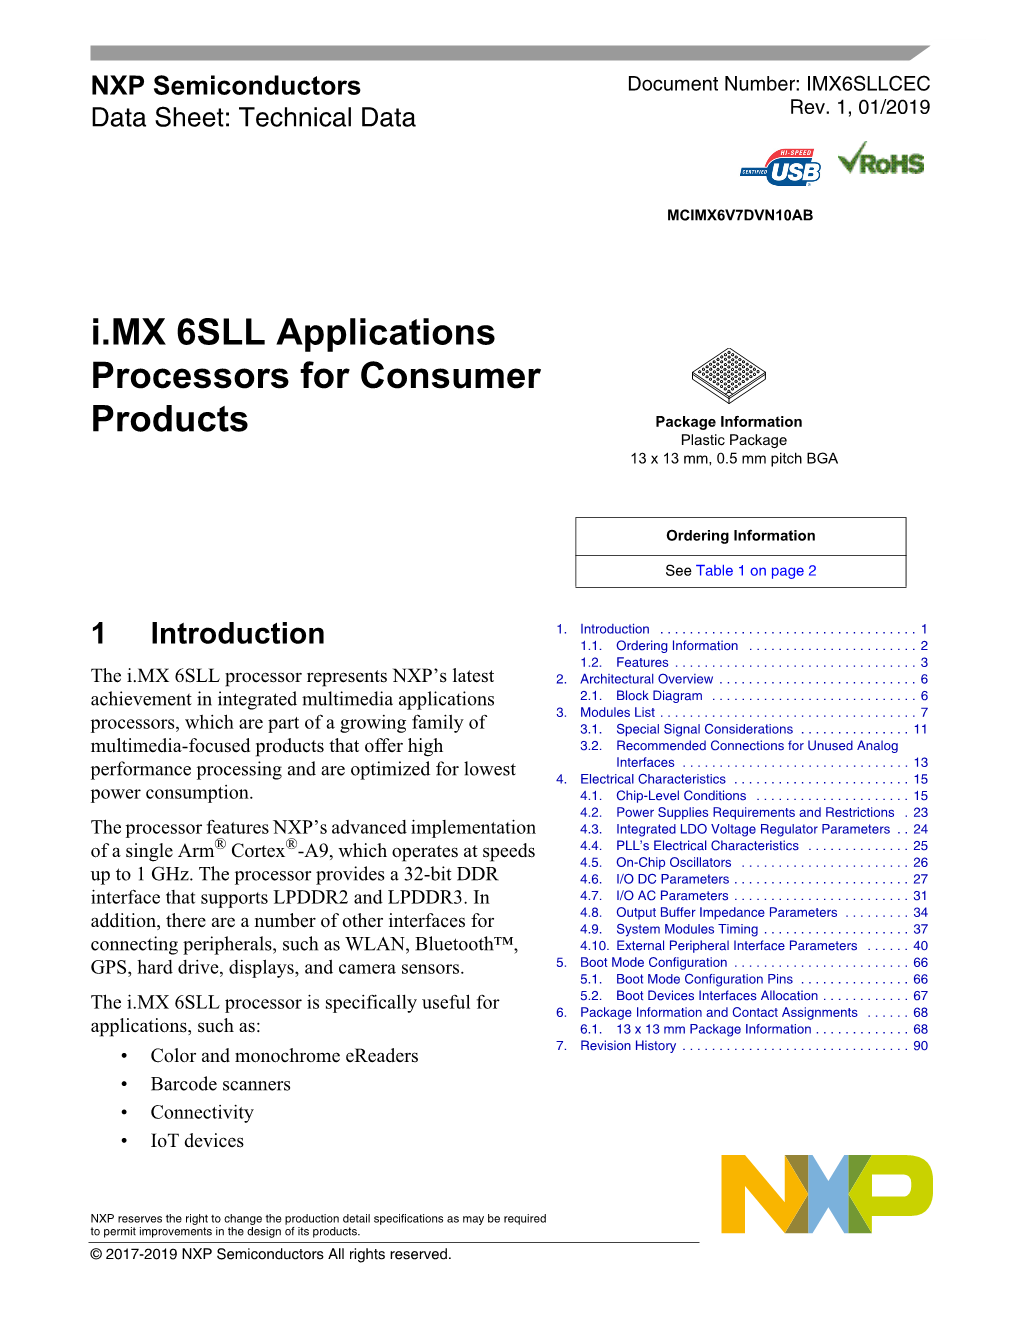 I.MX 6SLL Applications Processors for Consumer Products Package Information Plastic Package 13 X 13 Mm, 0.5 Mm Pitch BGA